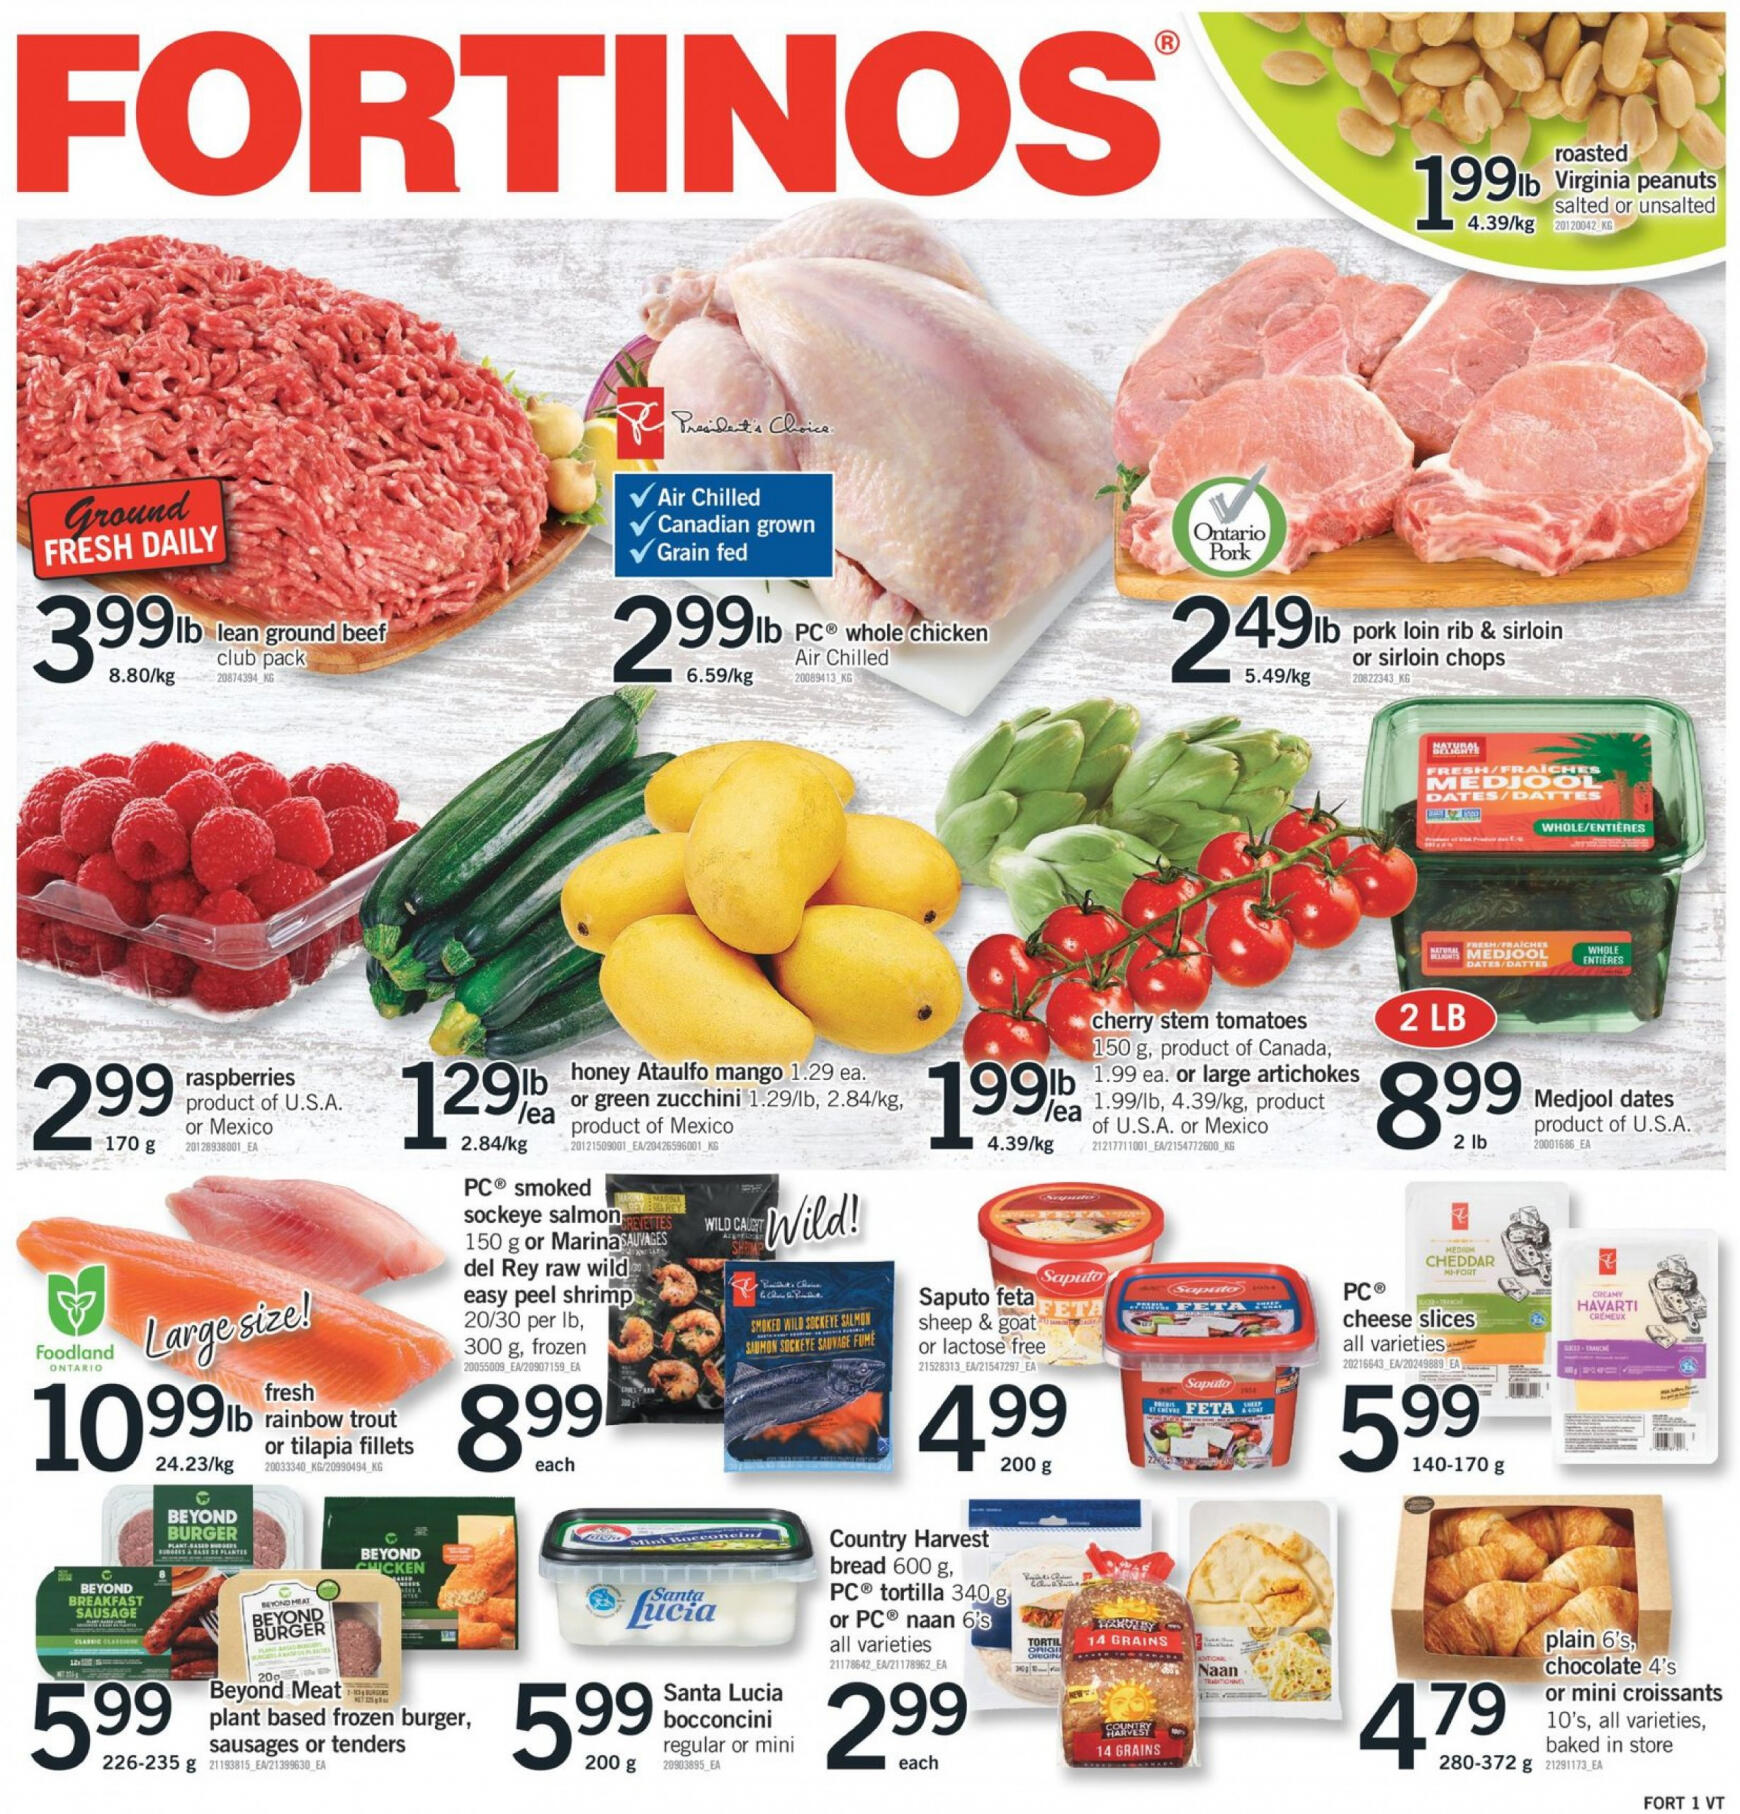 fortinos - Fortinos flyer current 04.04. - 10.04.